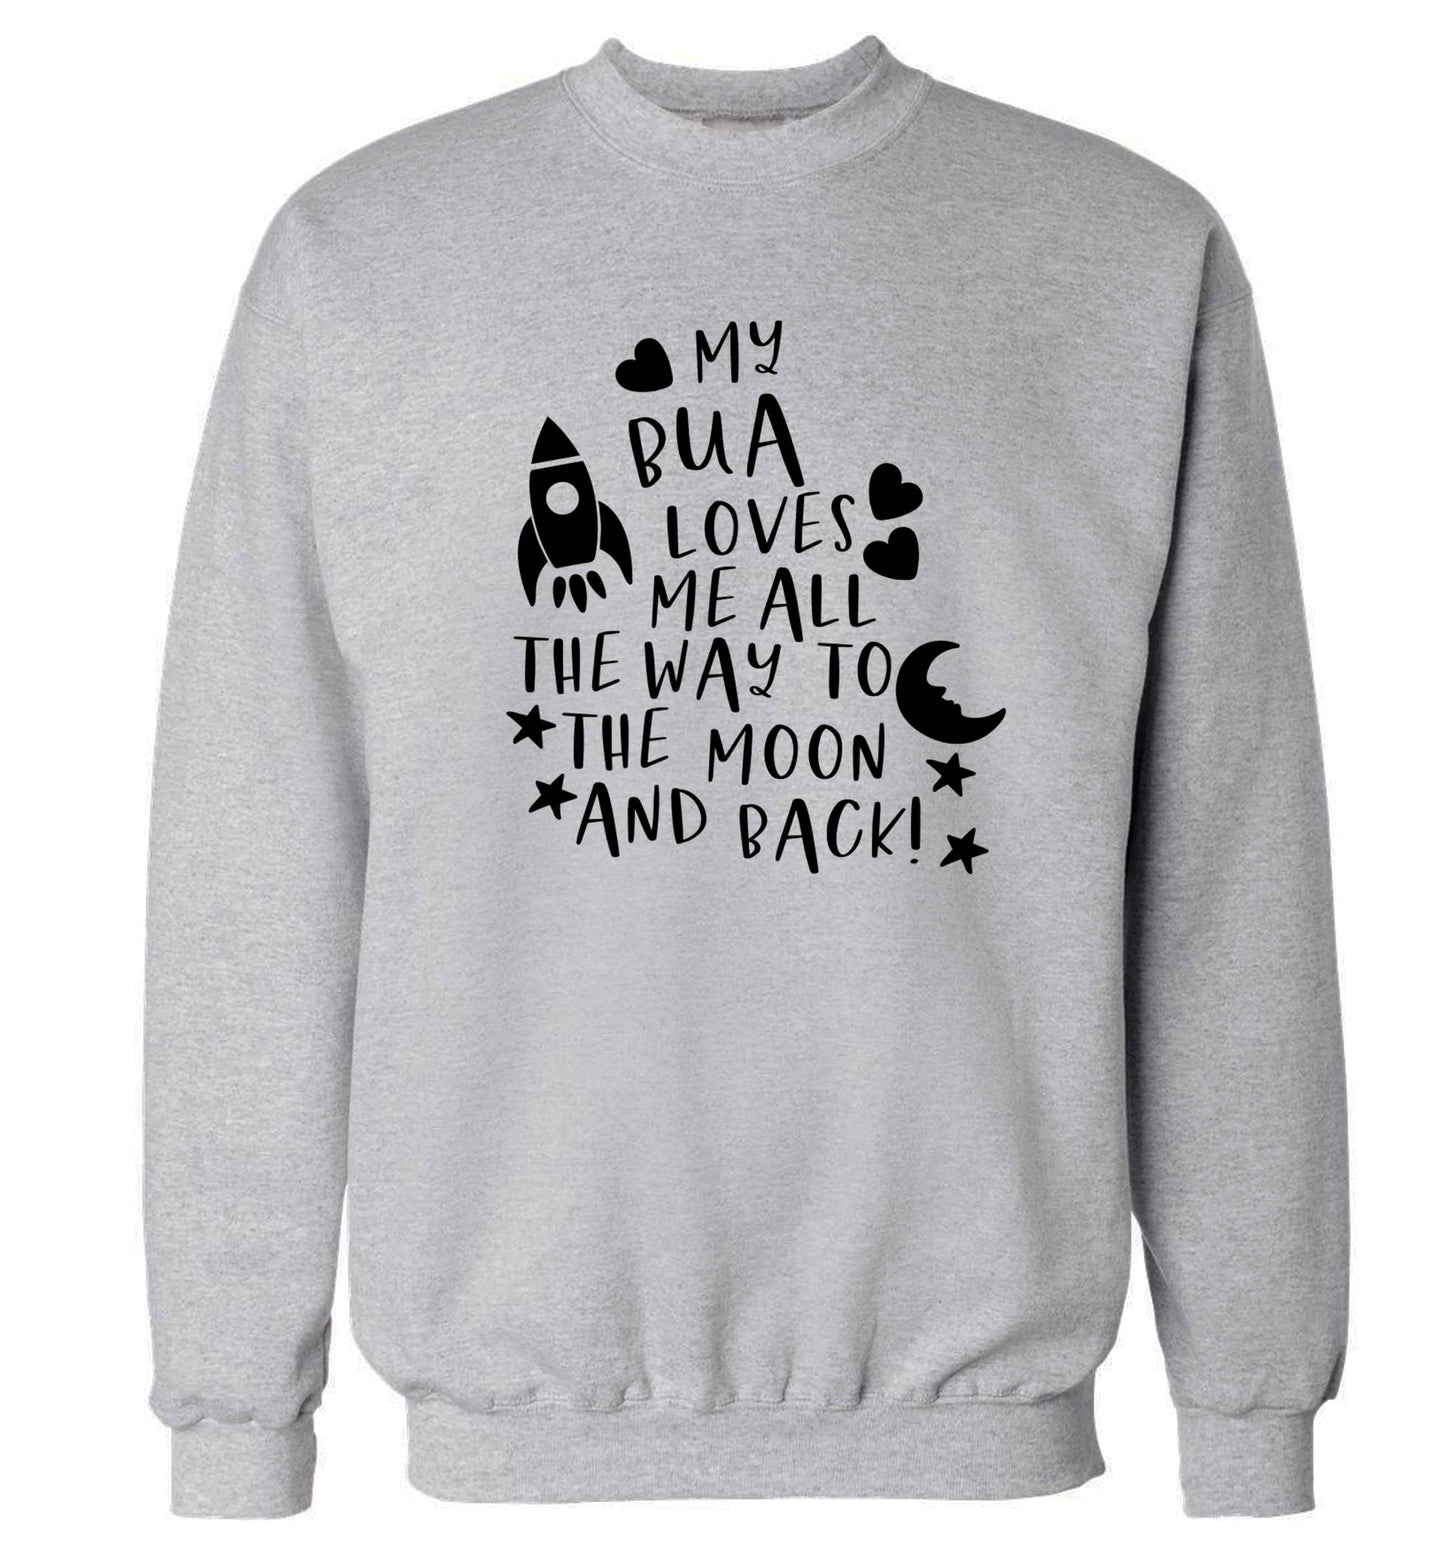 My bua loves me all they way to the moon and back Adult's unisex grey Sweater 2XL